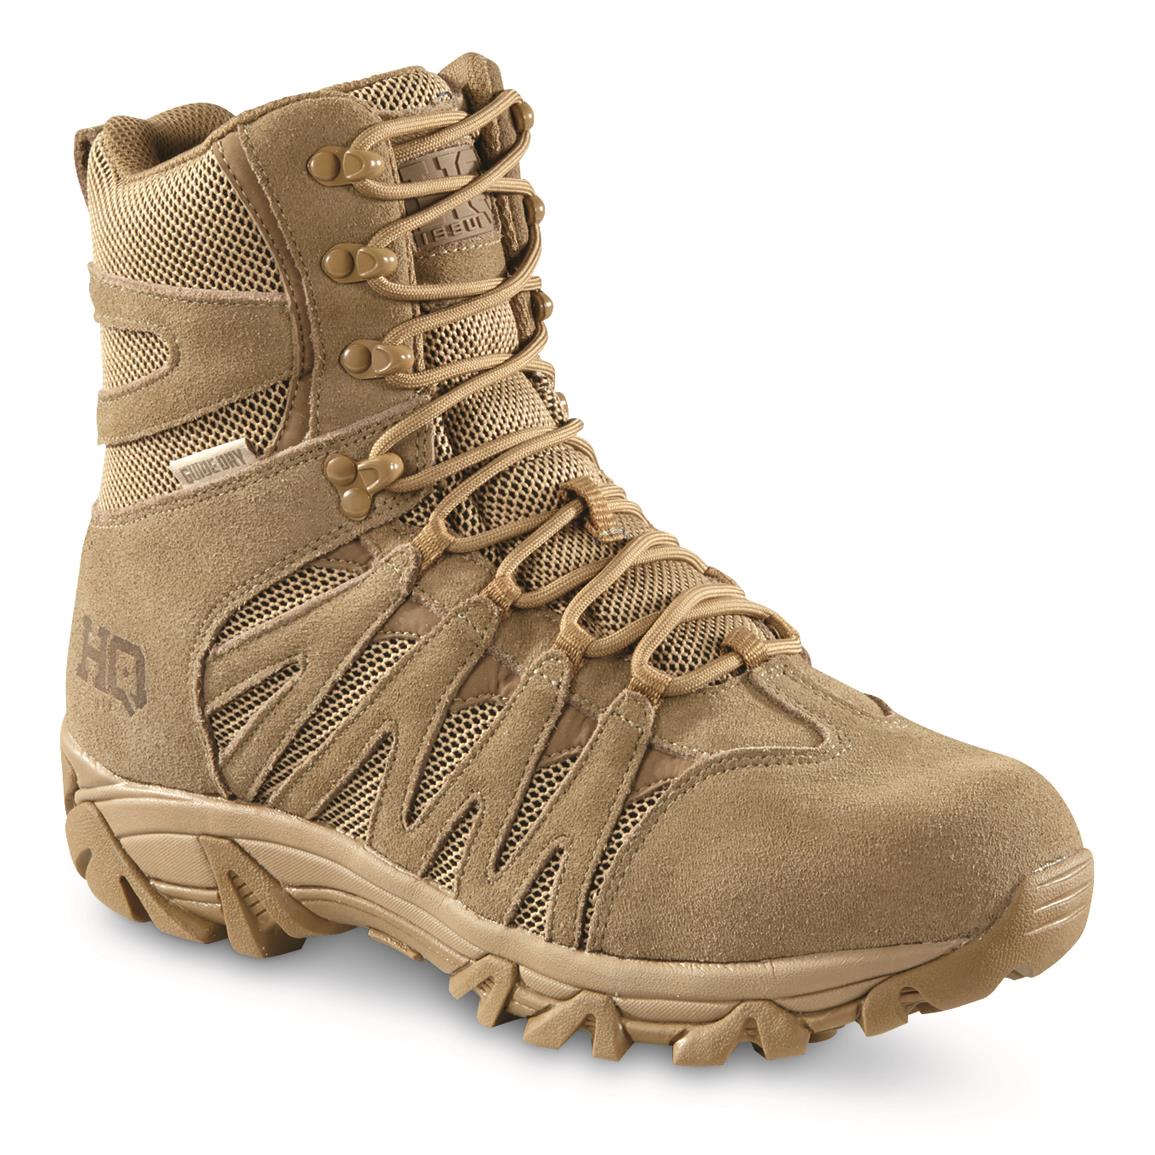 HQ ISSUE Men's Canyon 8" Waterproof Tactical Hiking Boots, Coyote